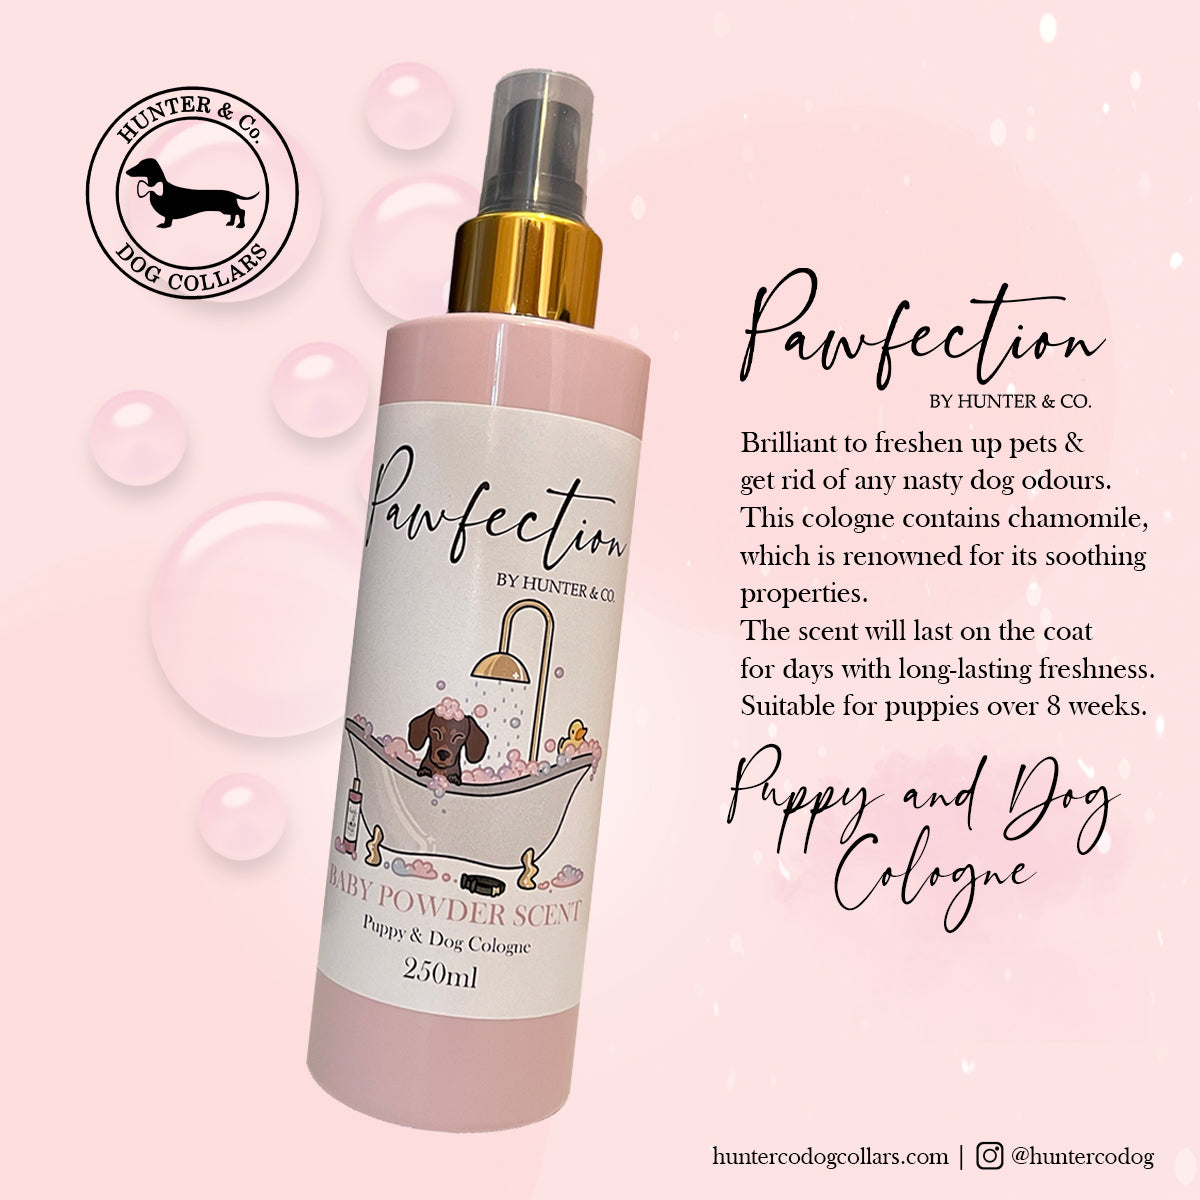 Pawfection Baby Powder Scent Puppy and Dog Cologne 250ml Hunter & Co.